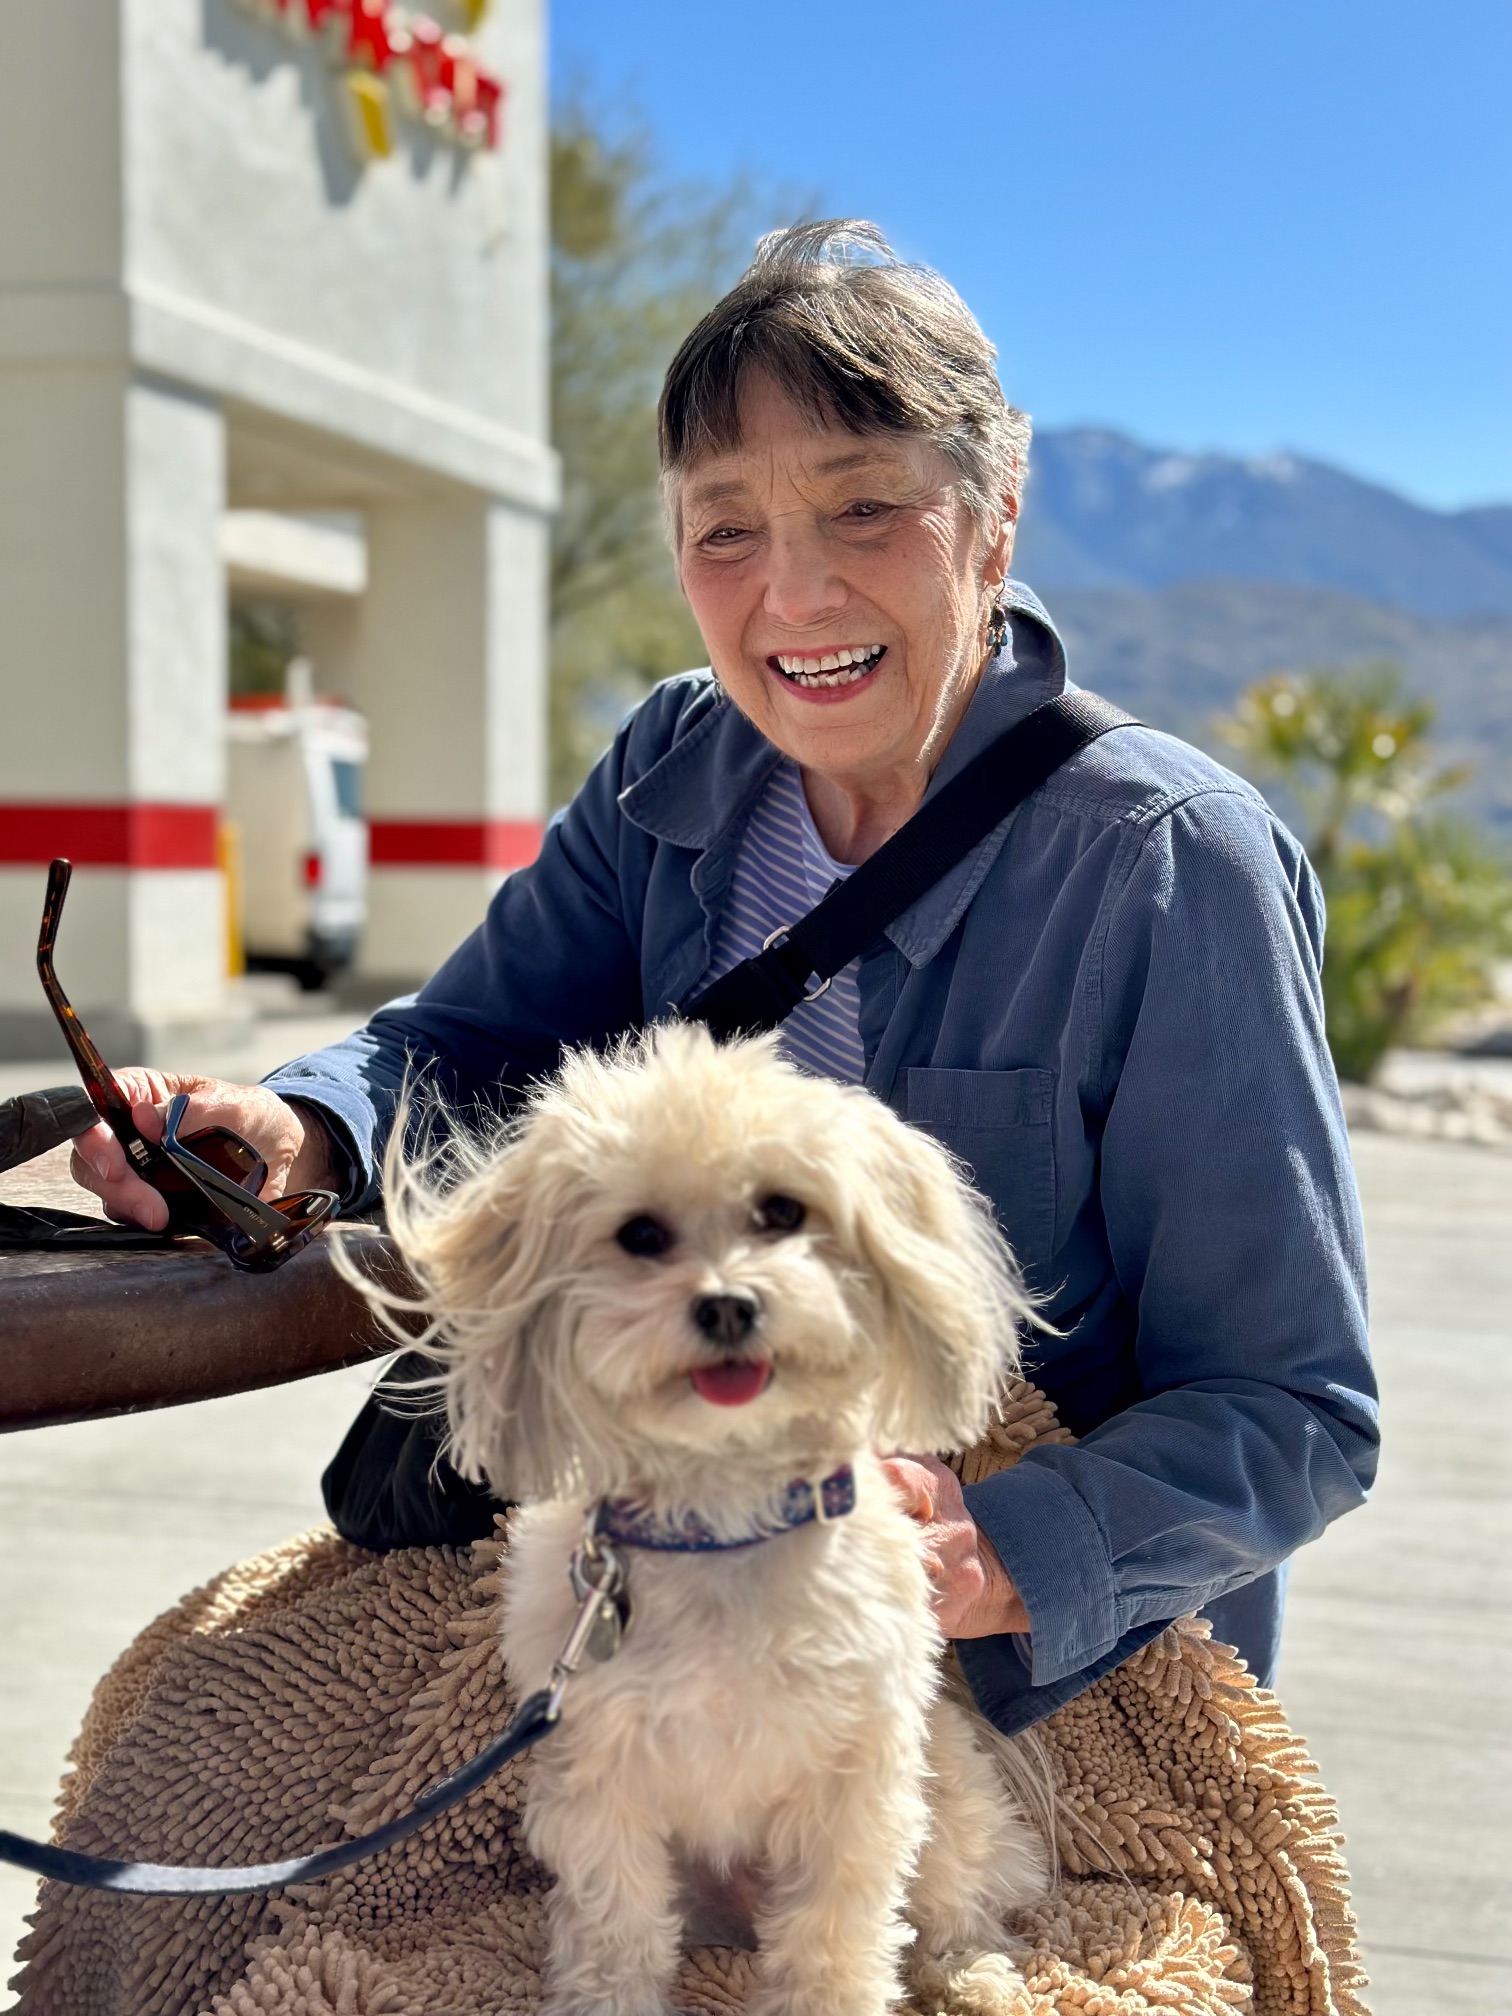 Smiling older woman with white dog